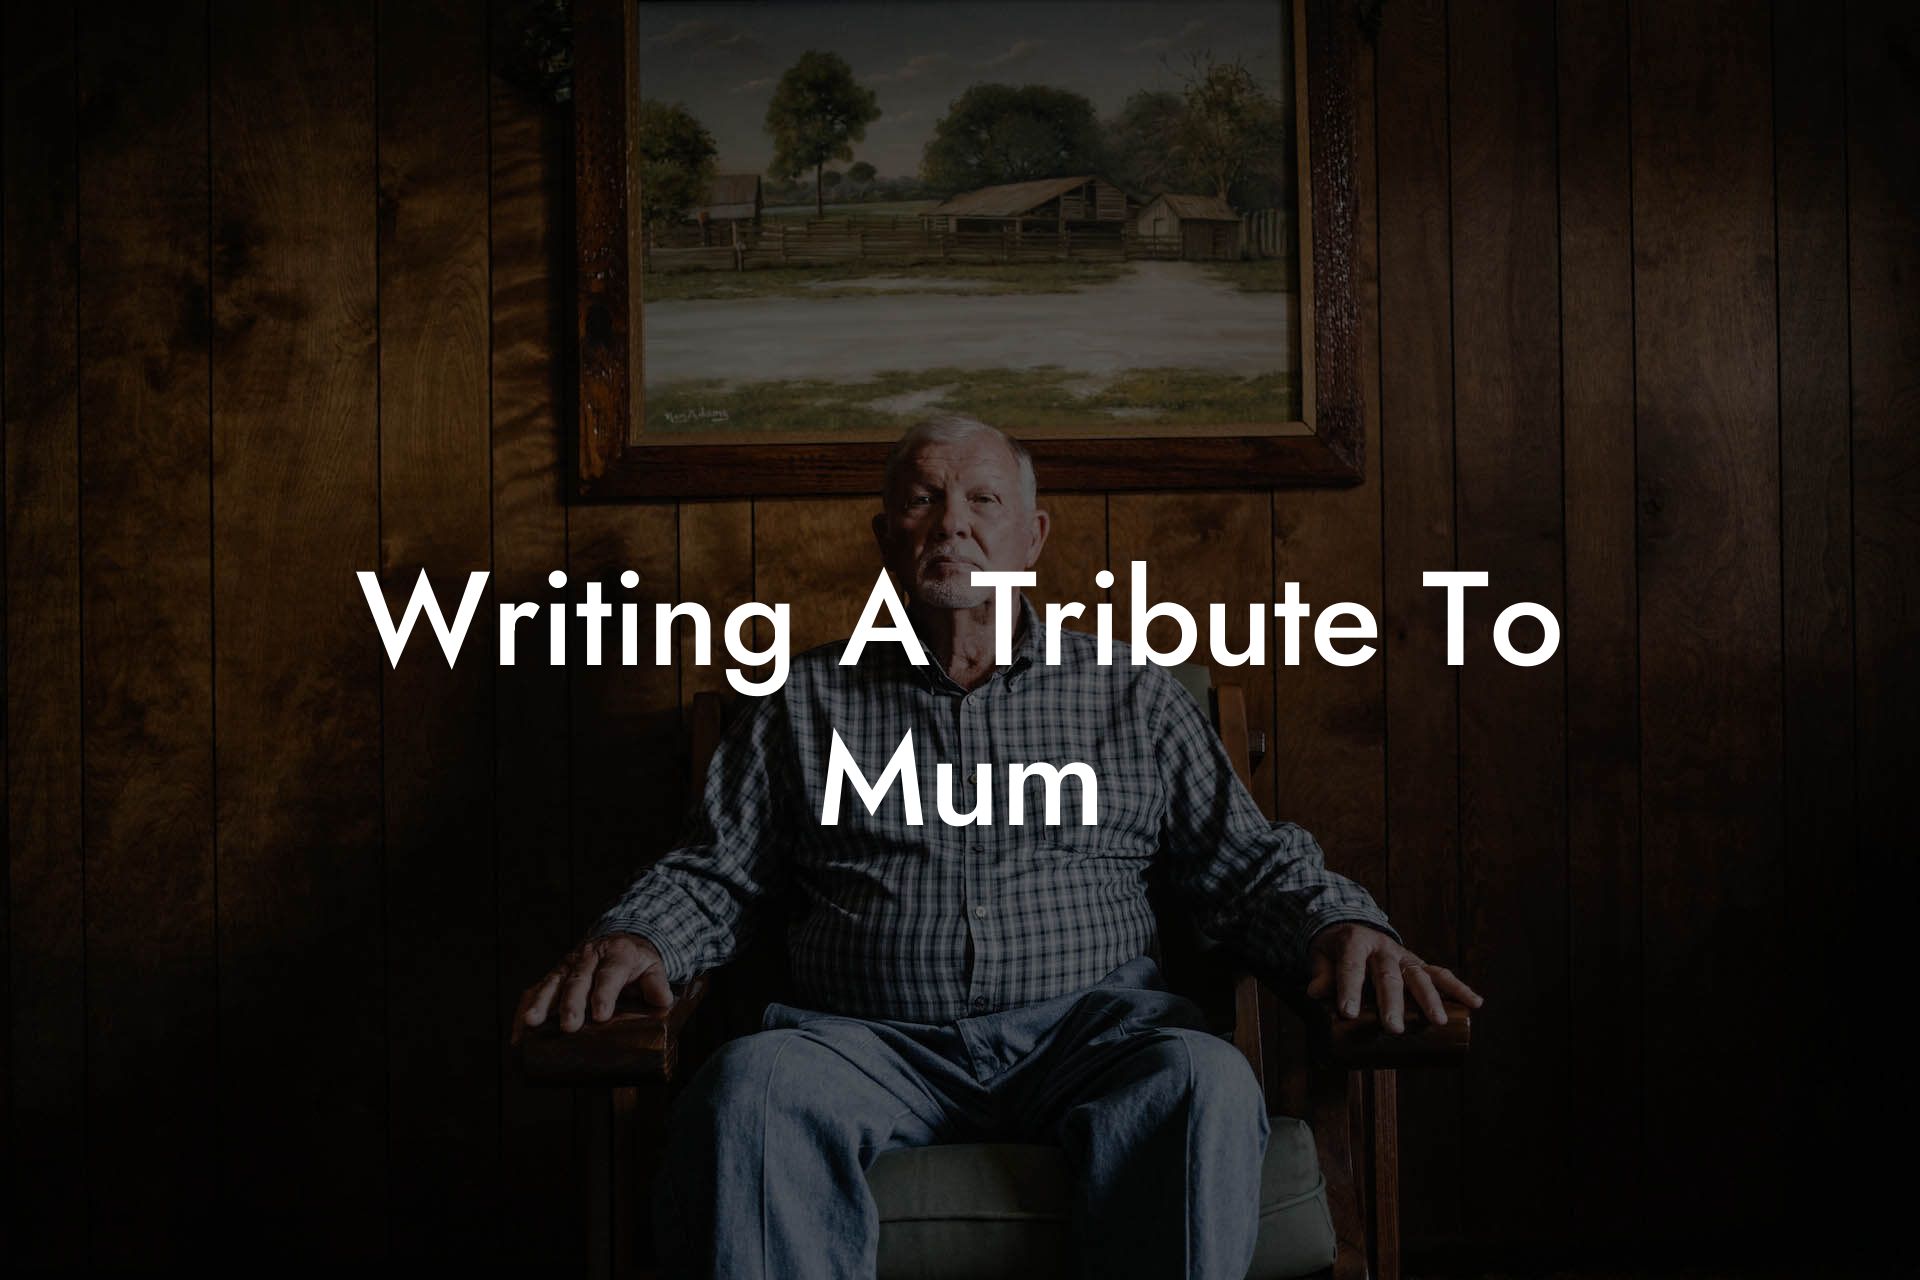 Writing A Tribute To Mum